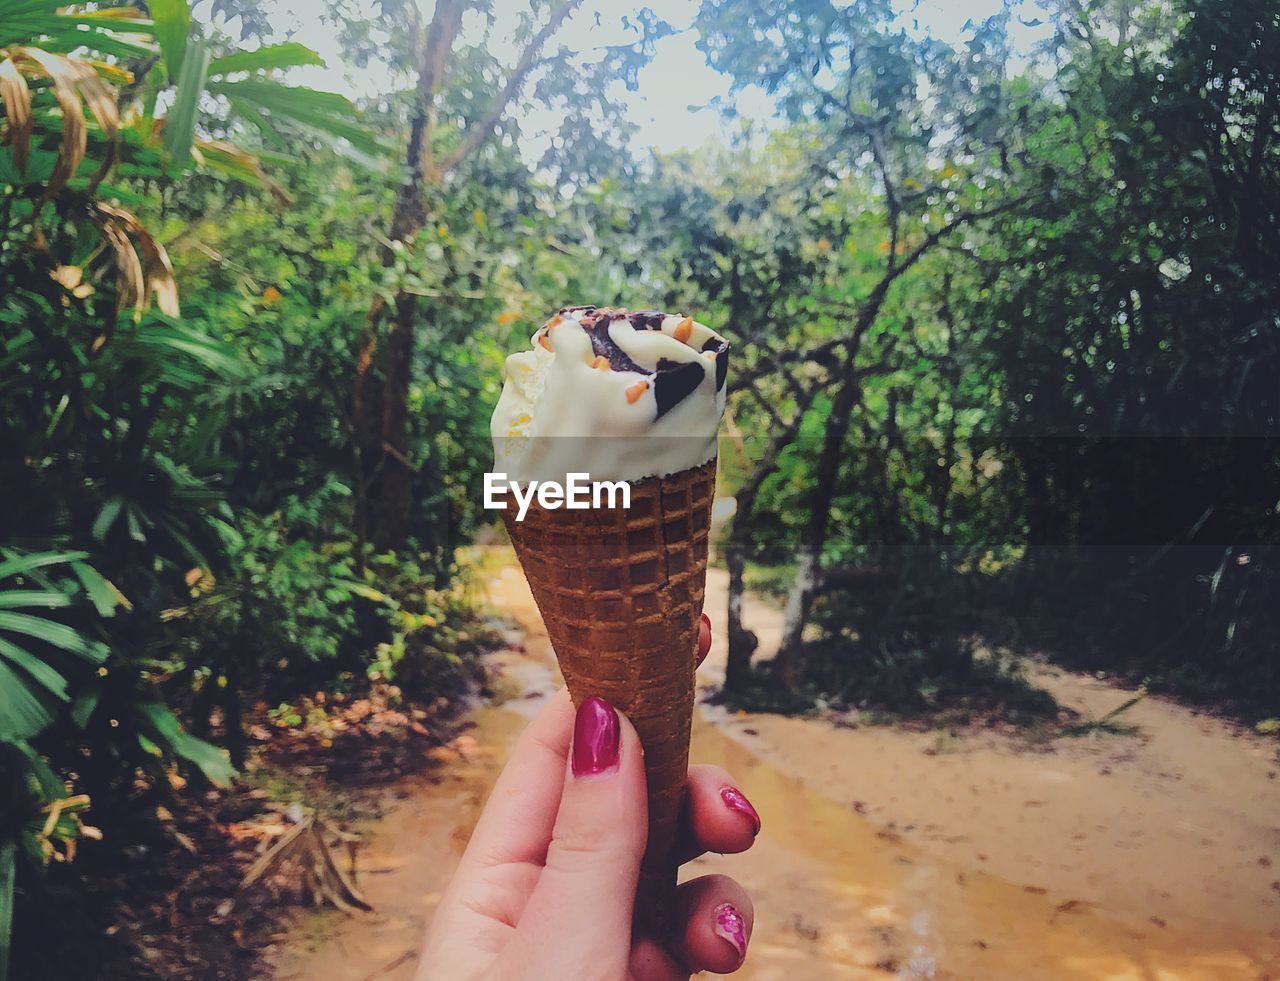 HAND HOLDING ICE CREAM CONE AGAINST TREES AND WOODEN TABLE